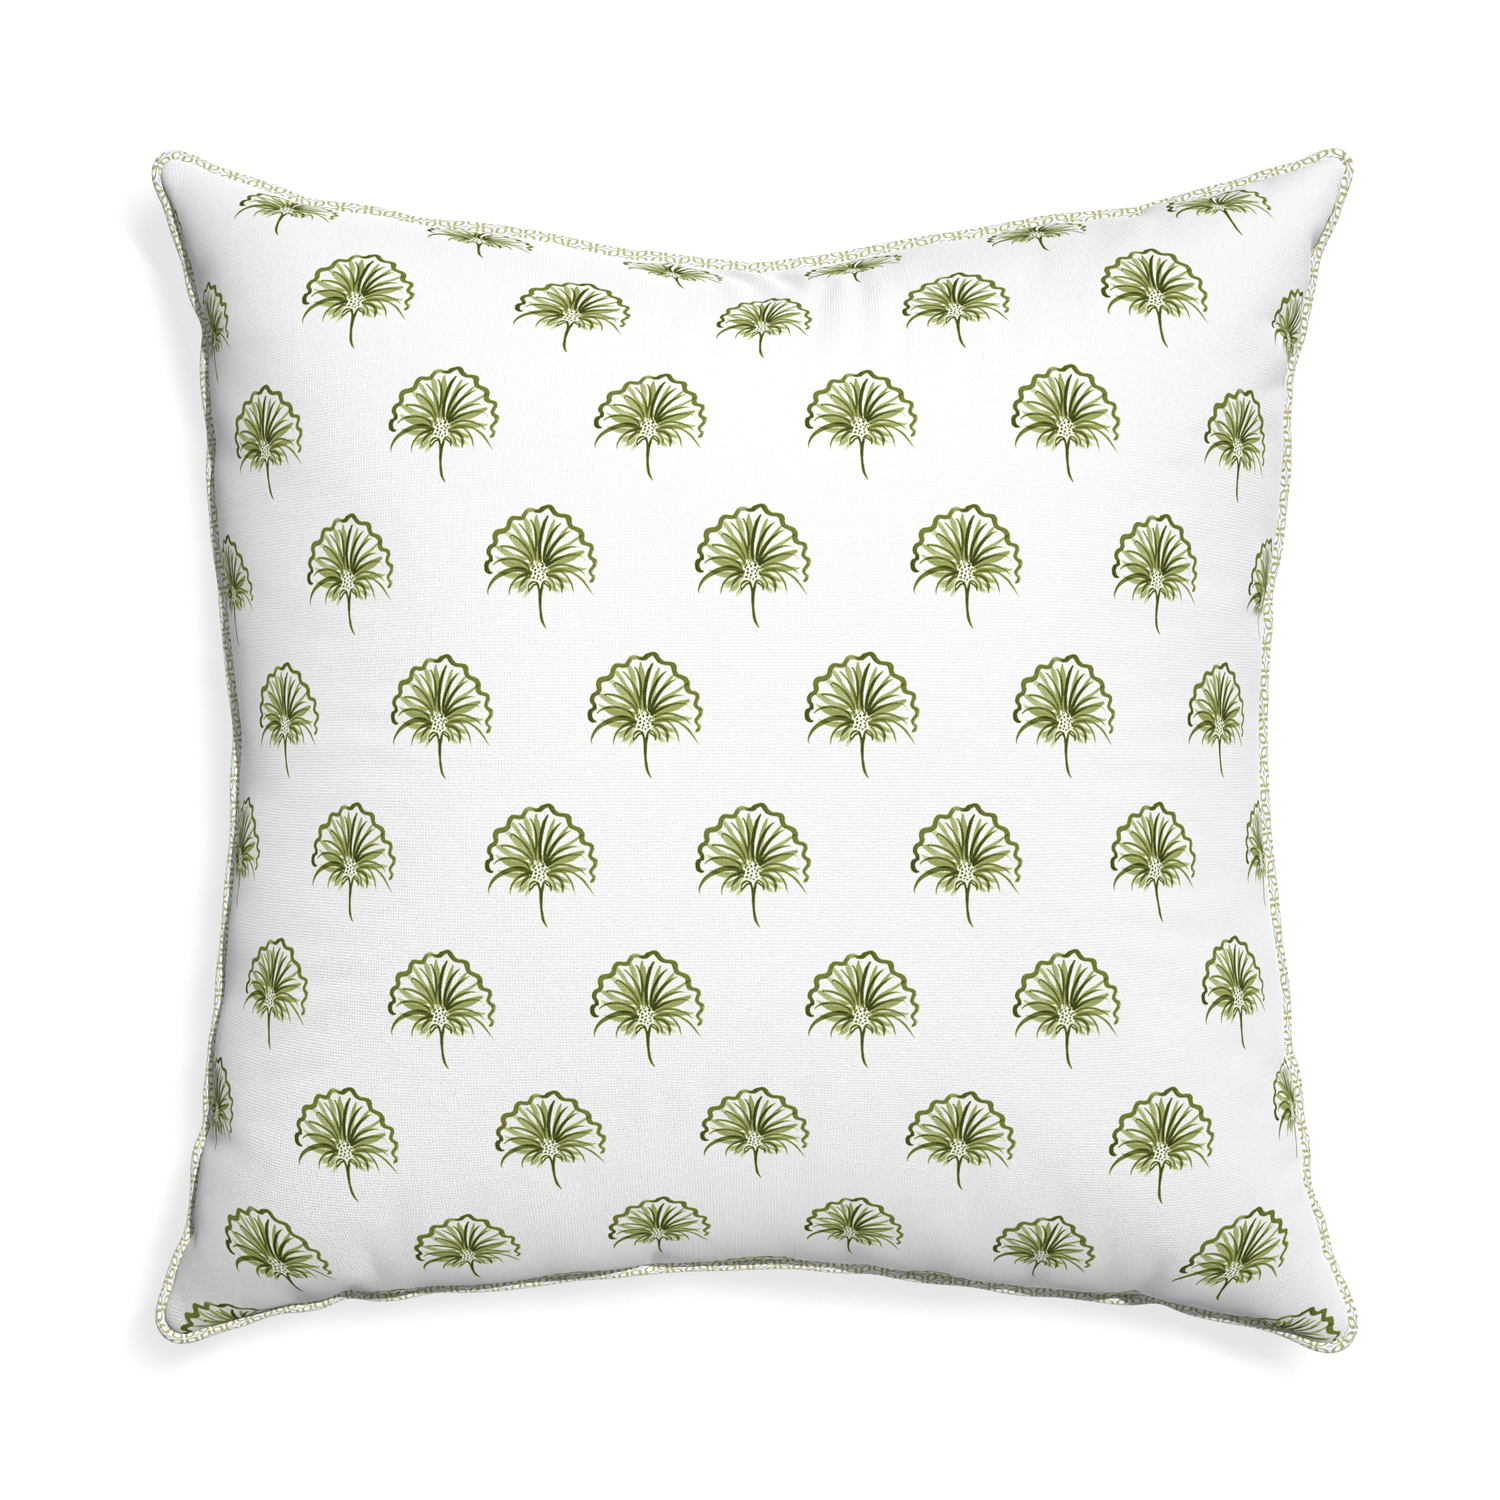 Euro-sham penelope moss custom green floralpillow with l piping on white background